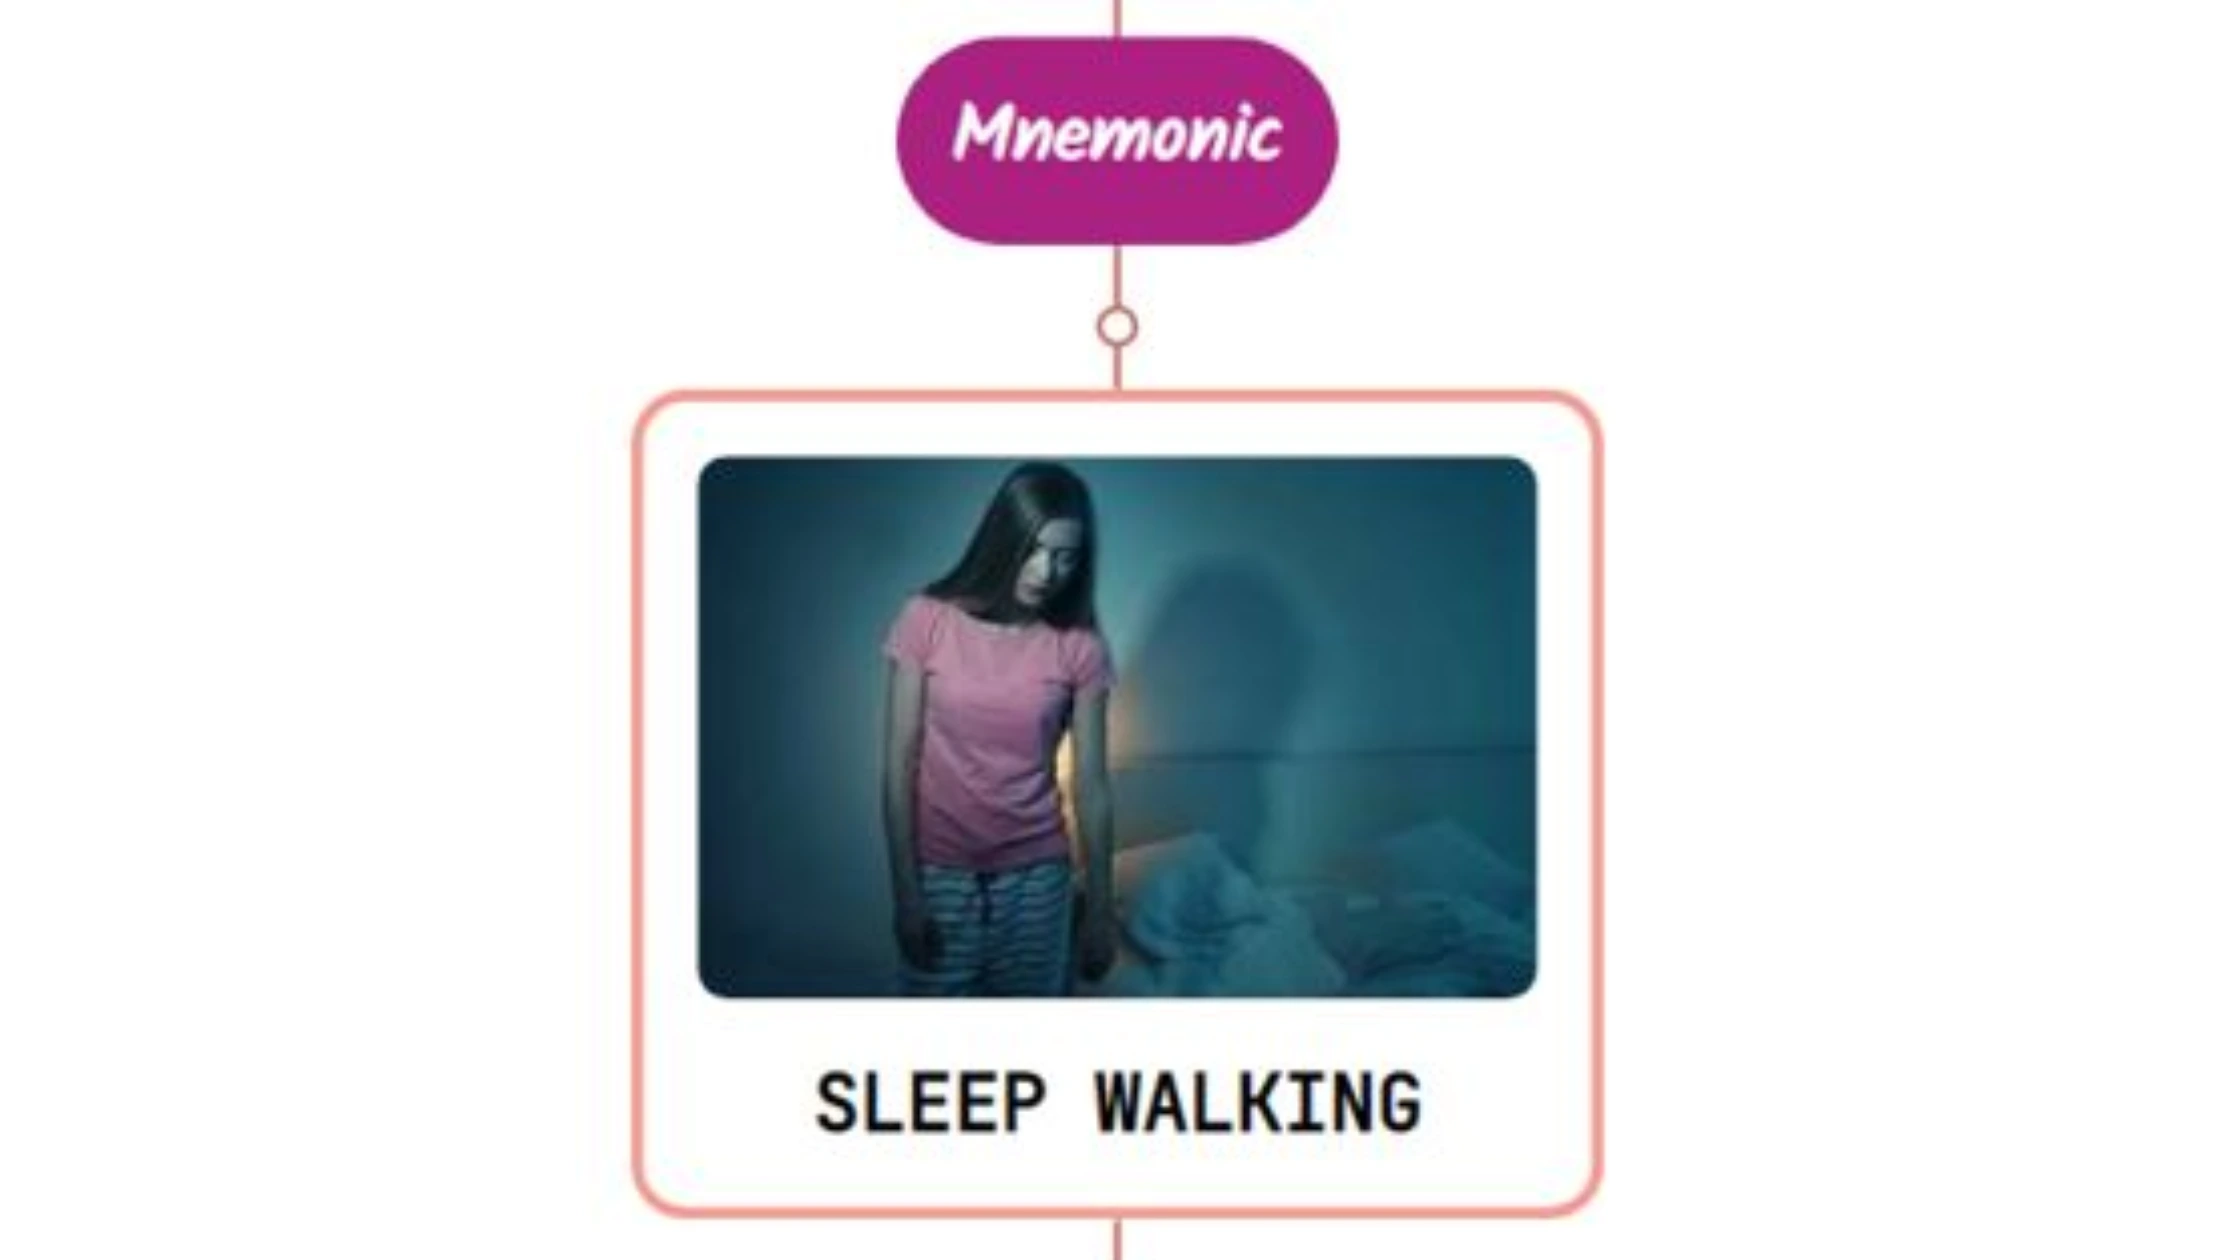 You are currently viewing Sleepwalking (Somnambulism) Mnemonic